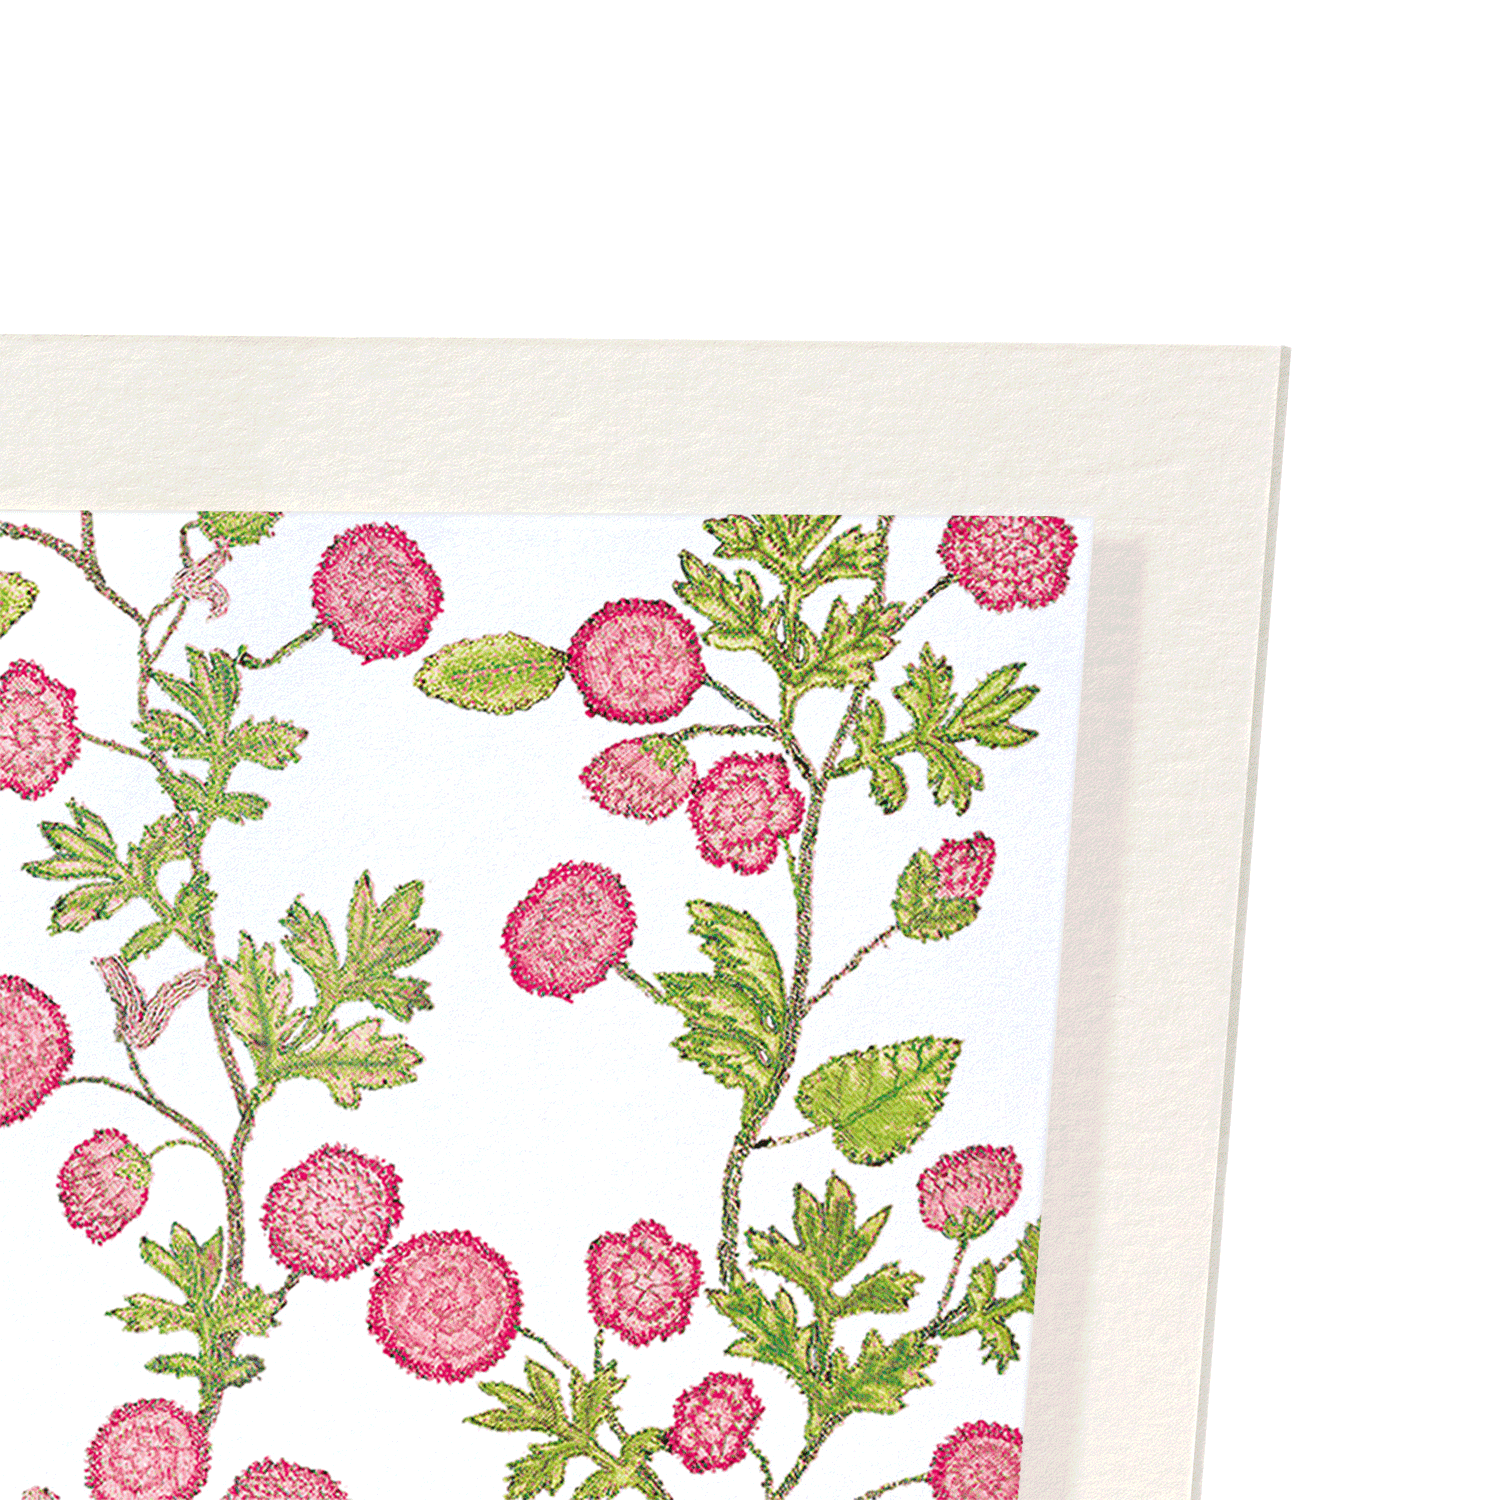 TUDOR EMBROIDERY OF ROSES ON WHITE (16TH C.)